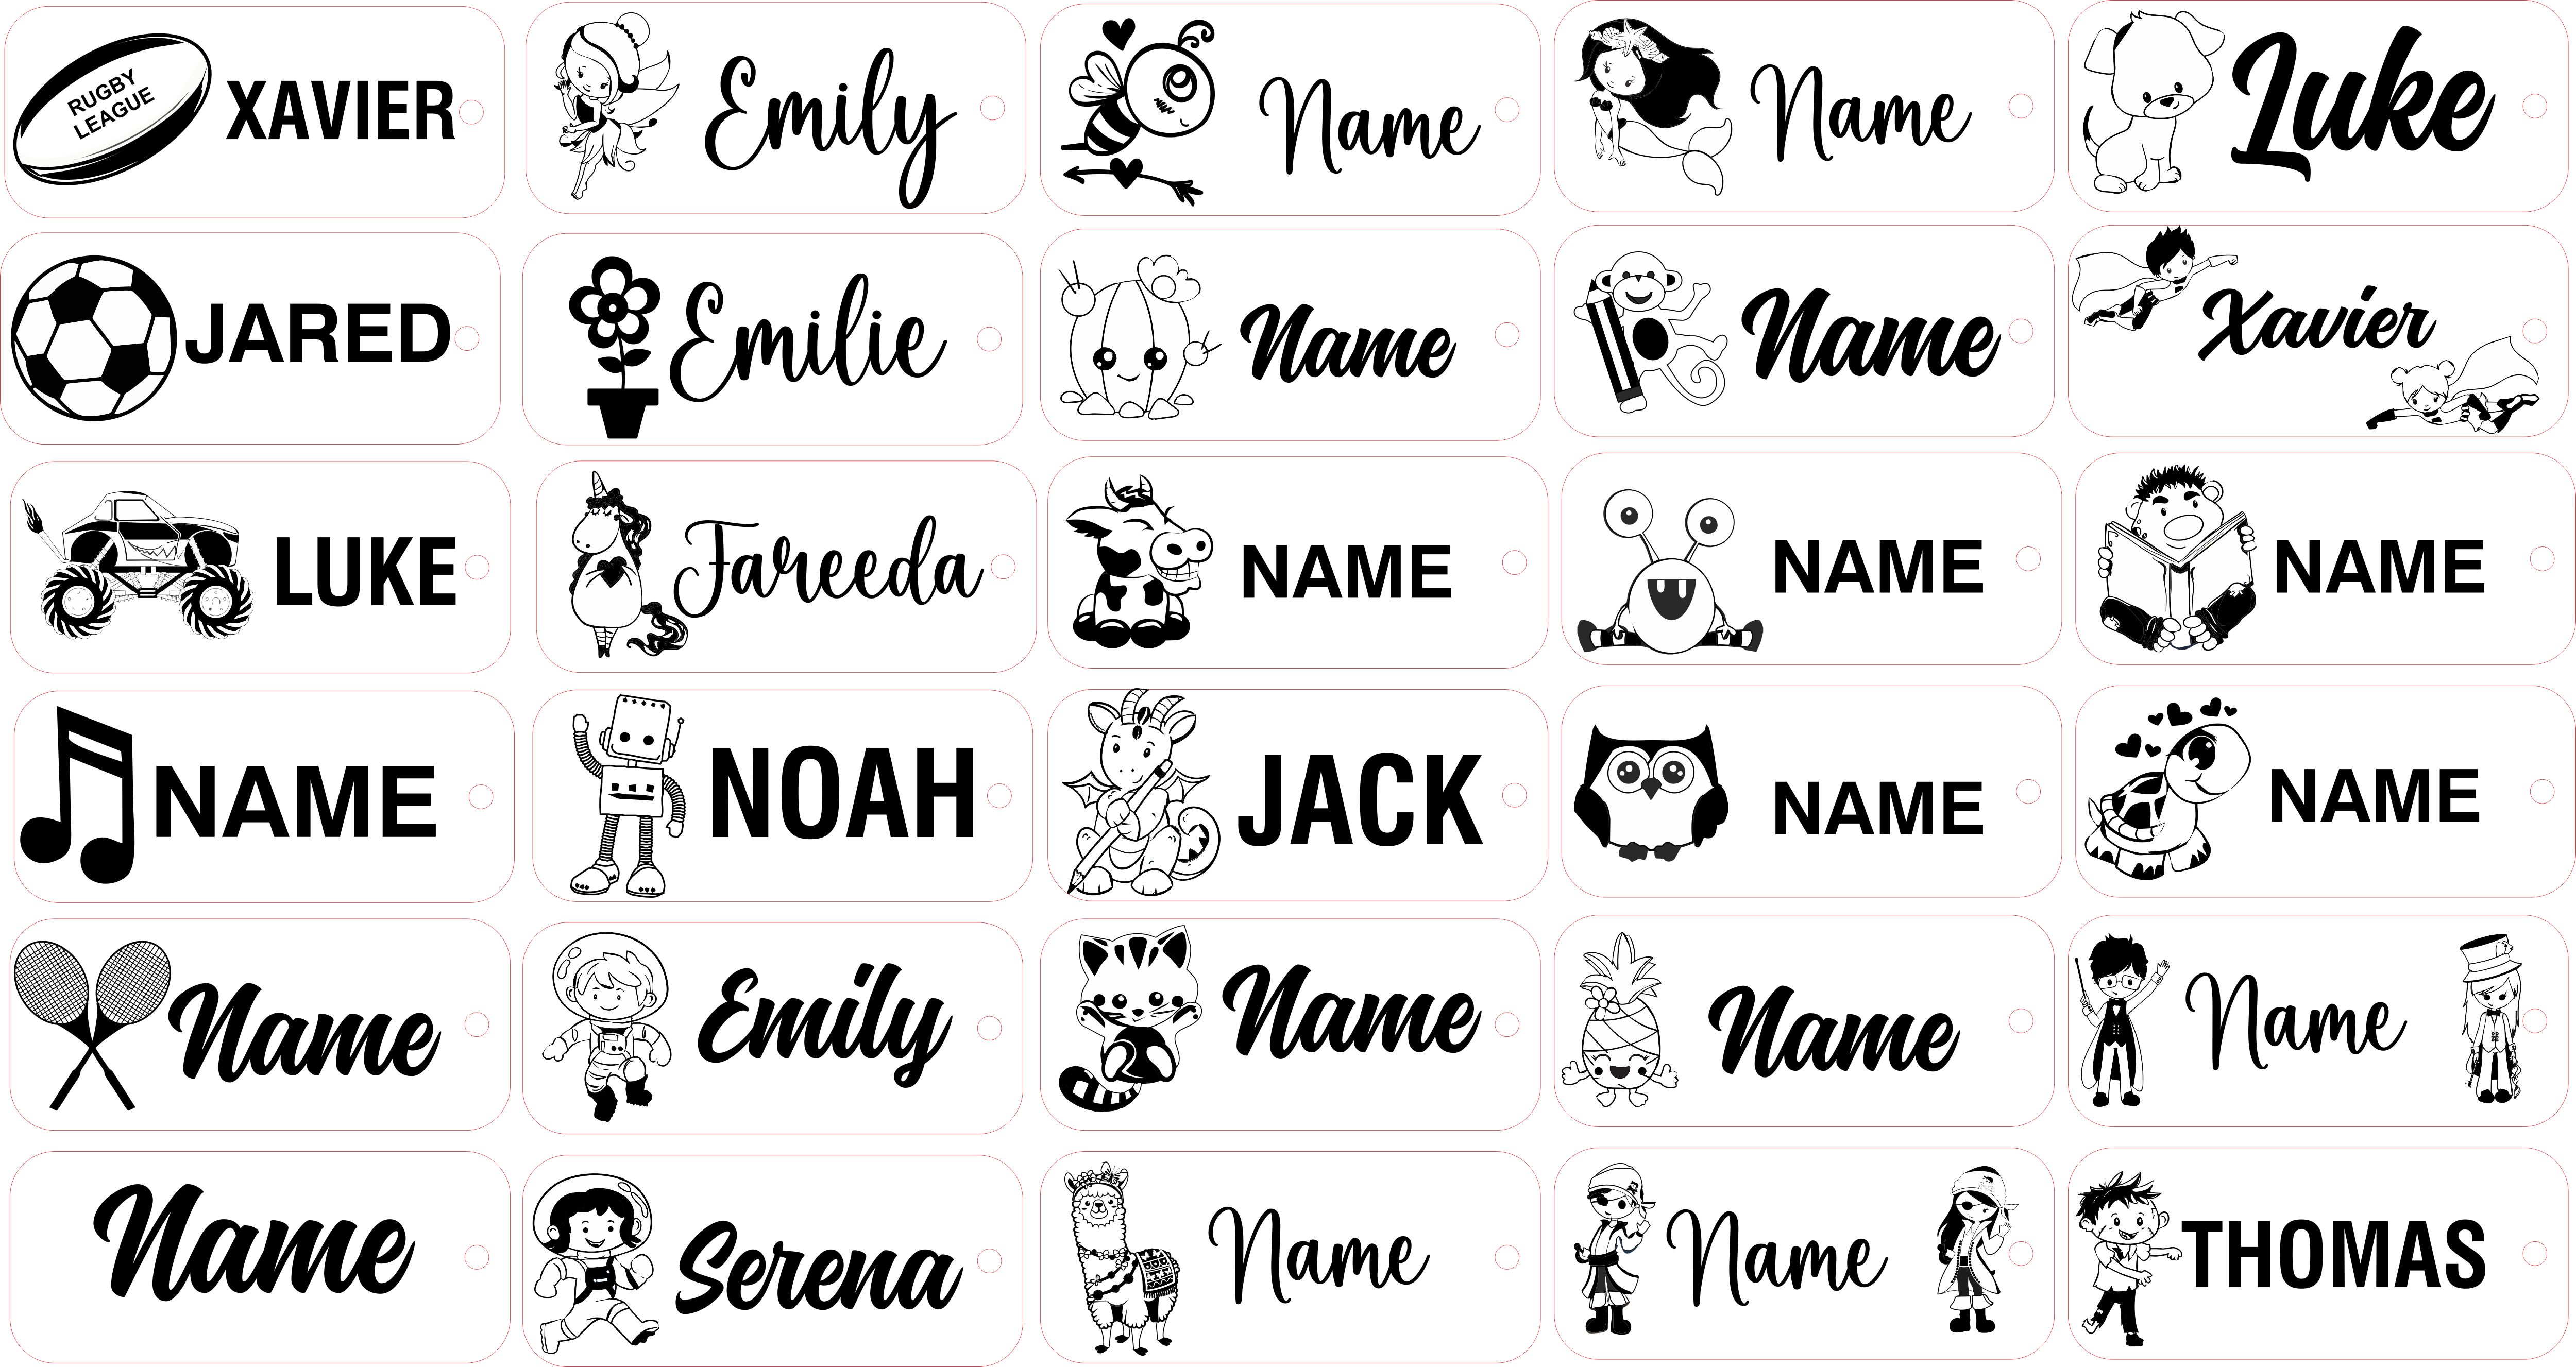 PERSONALISED NAME TAG LARGE with/without image